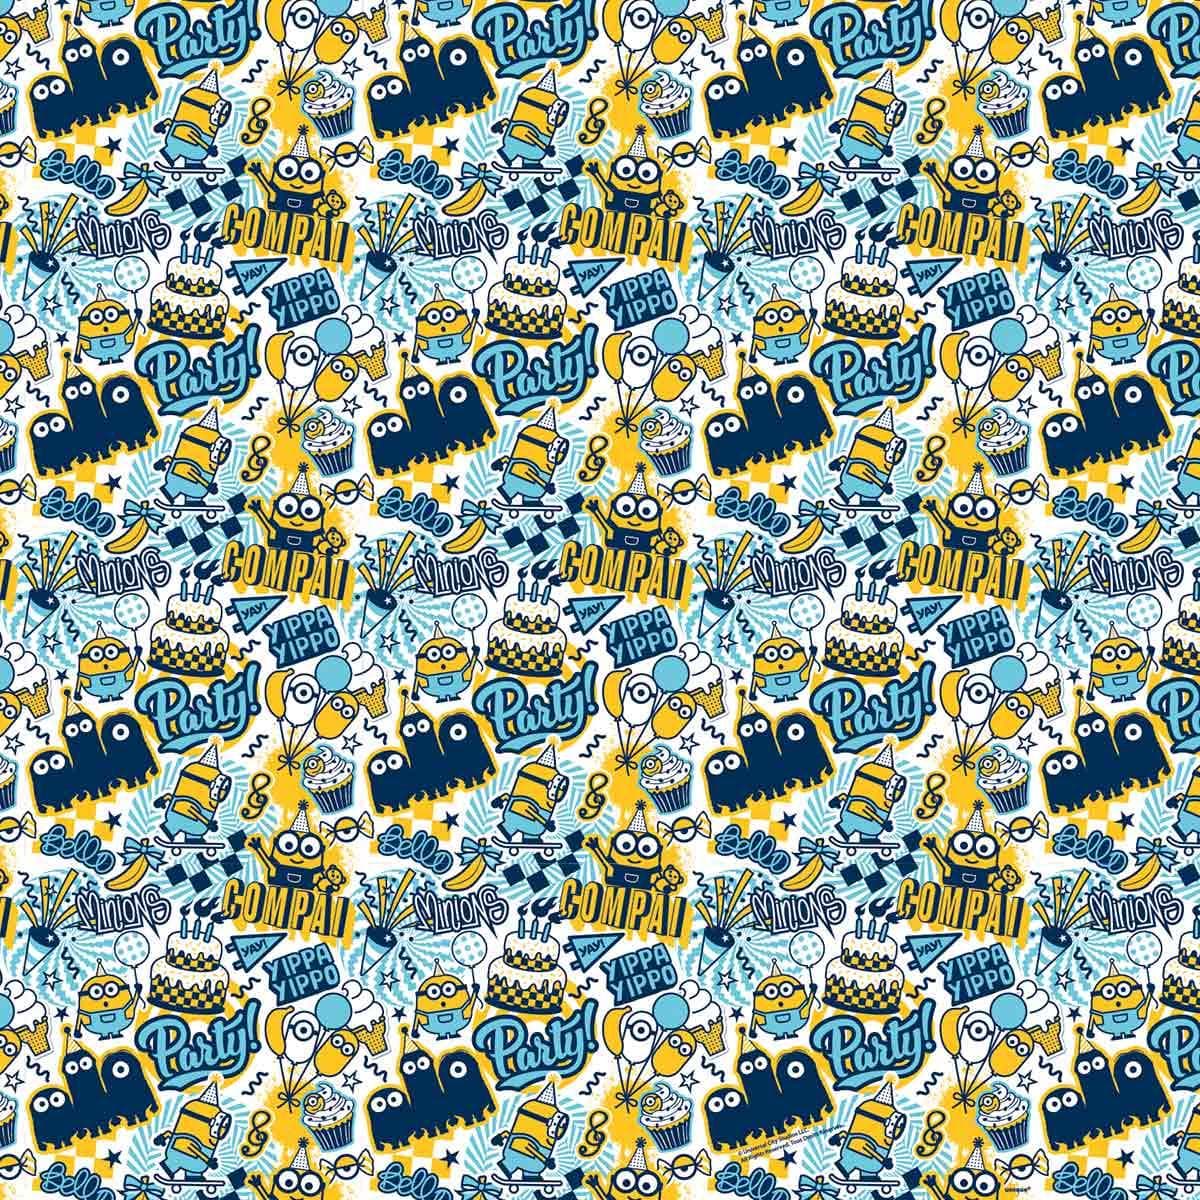 Buy Kids Birthday Minions Gift Wrap Roll sold at Party Expert